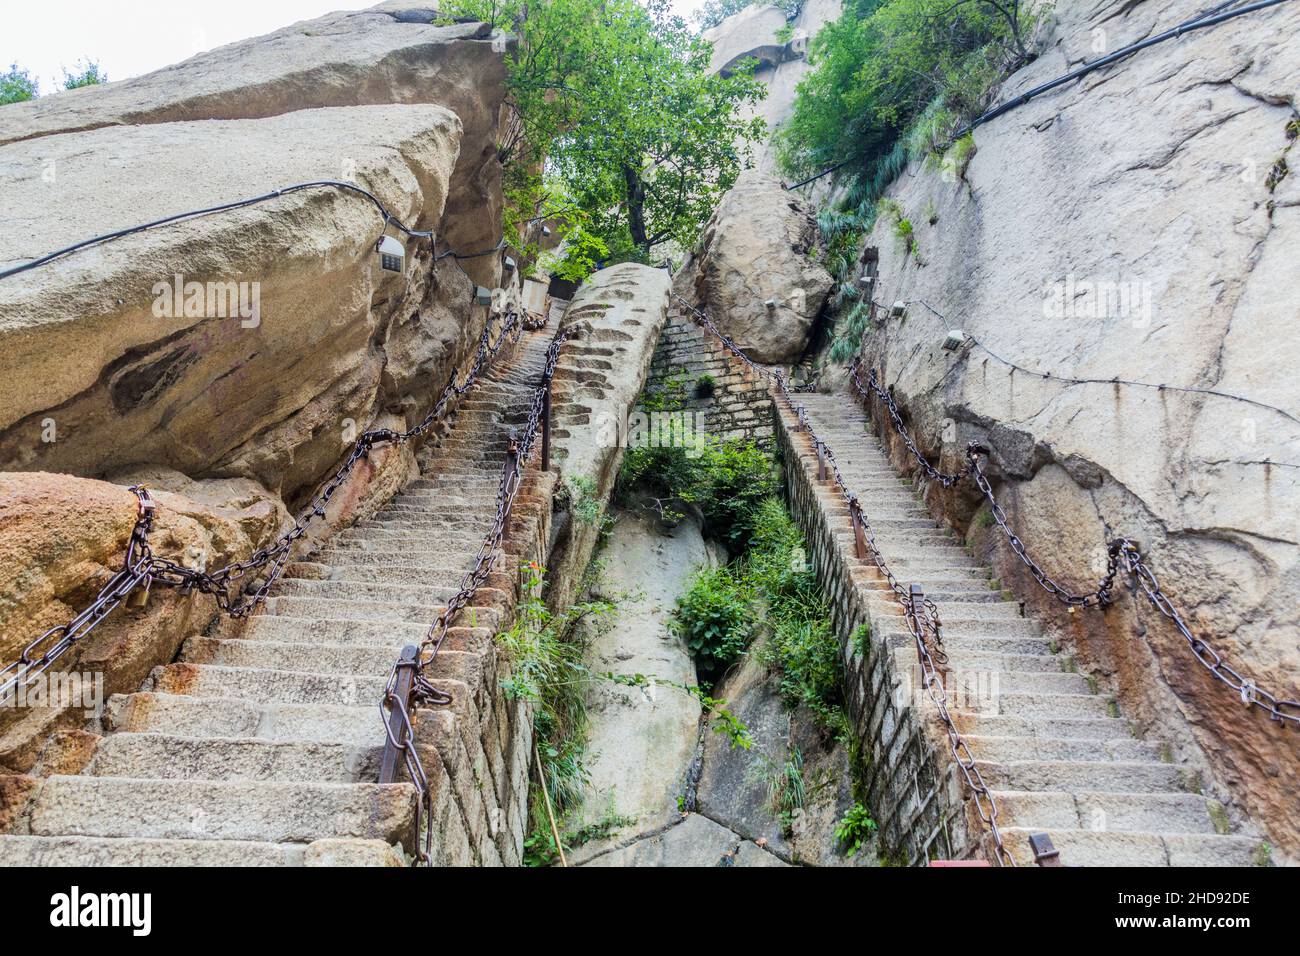 Stairs leading to the peaks of Hua Shan mountain, China Stock Photo